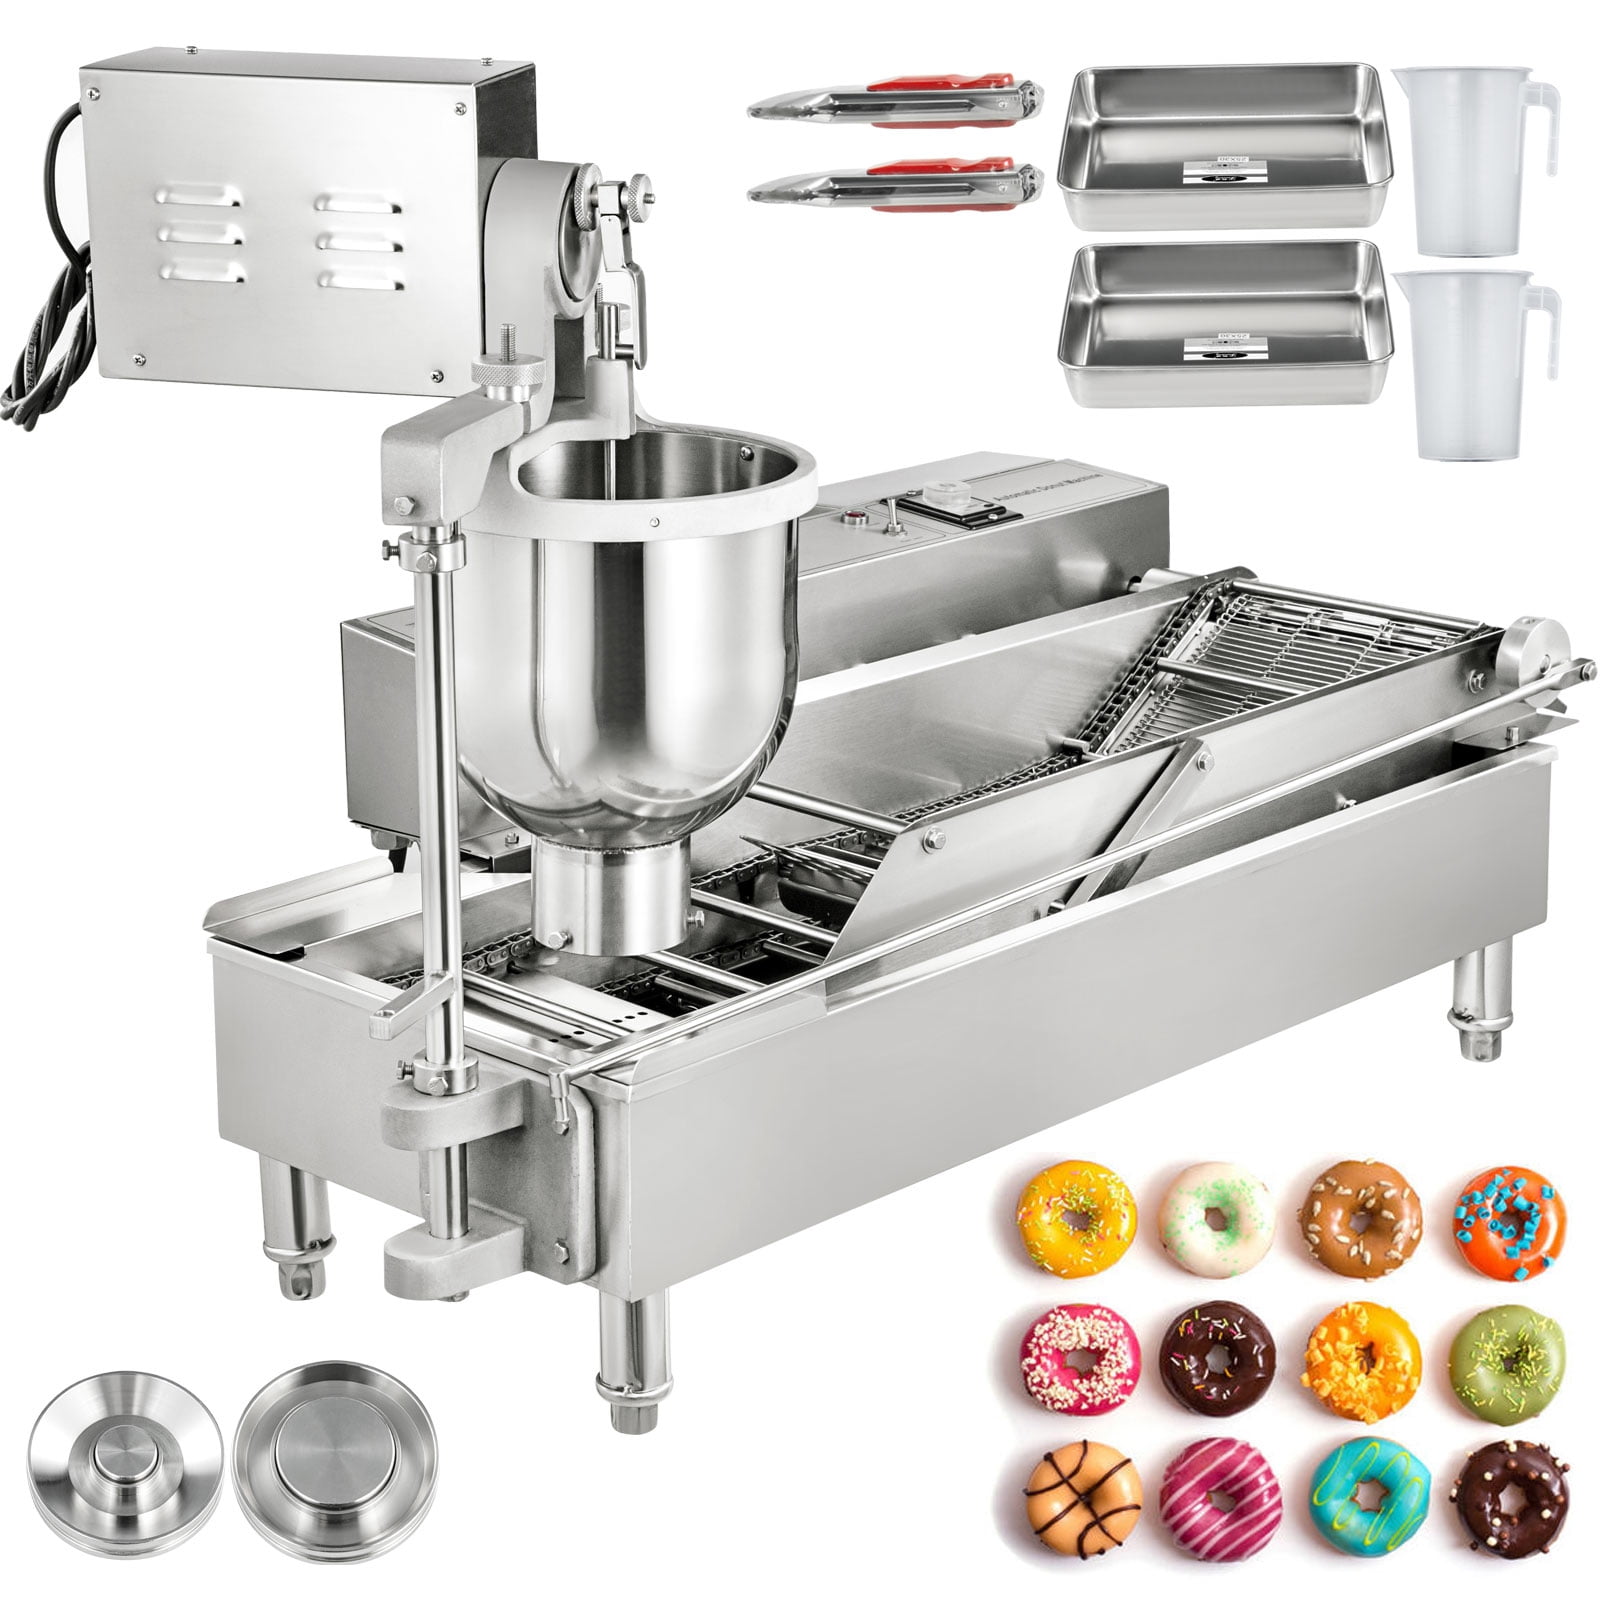 Details about   New Automatic Stainless Steel Mini Donut Maker Donut Making Machine 3 sizes CE T 